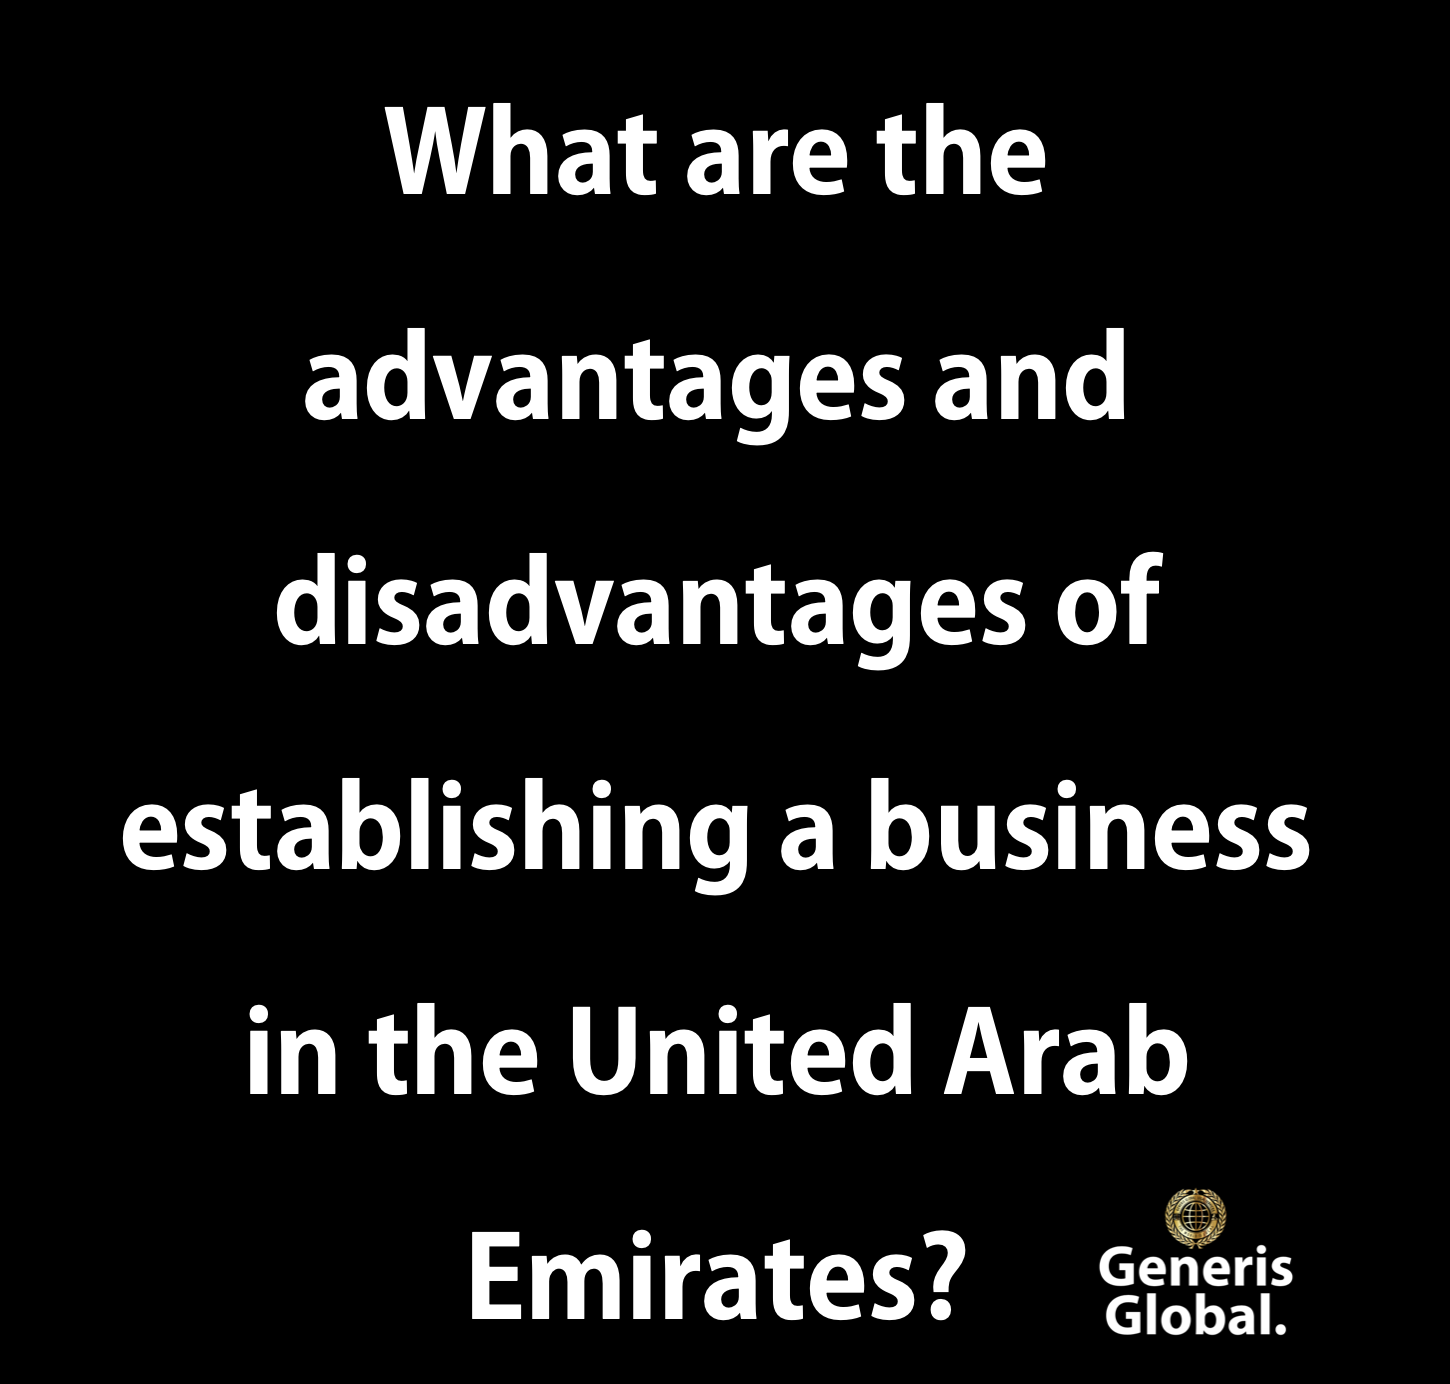 What are the advantages and disadvantages of establishing a business in the United Arab Emirates?